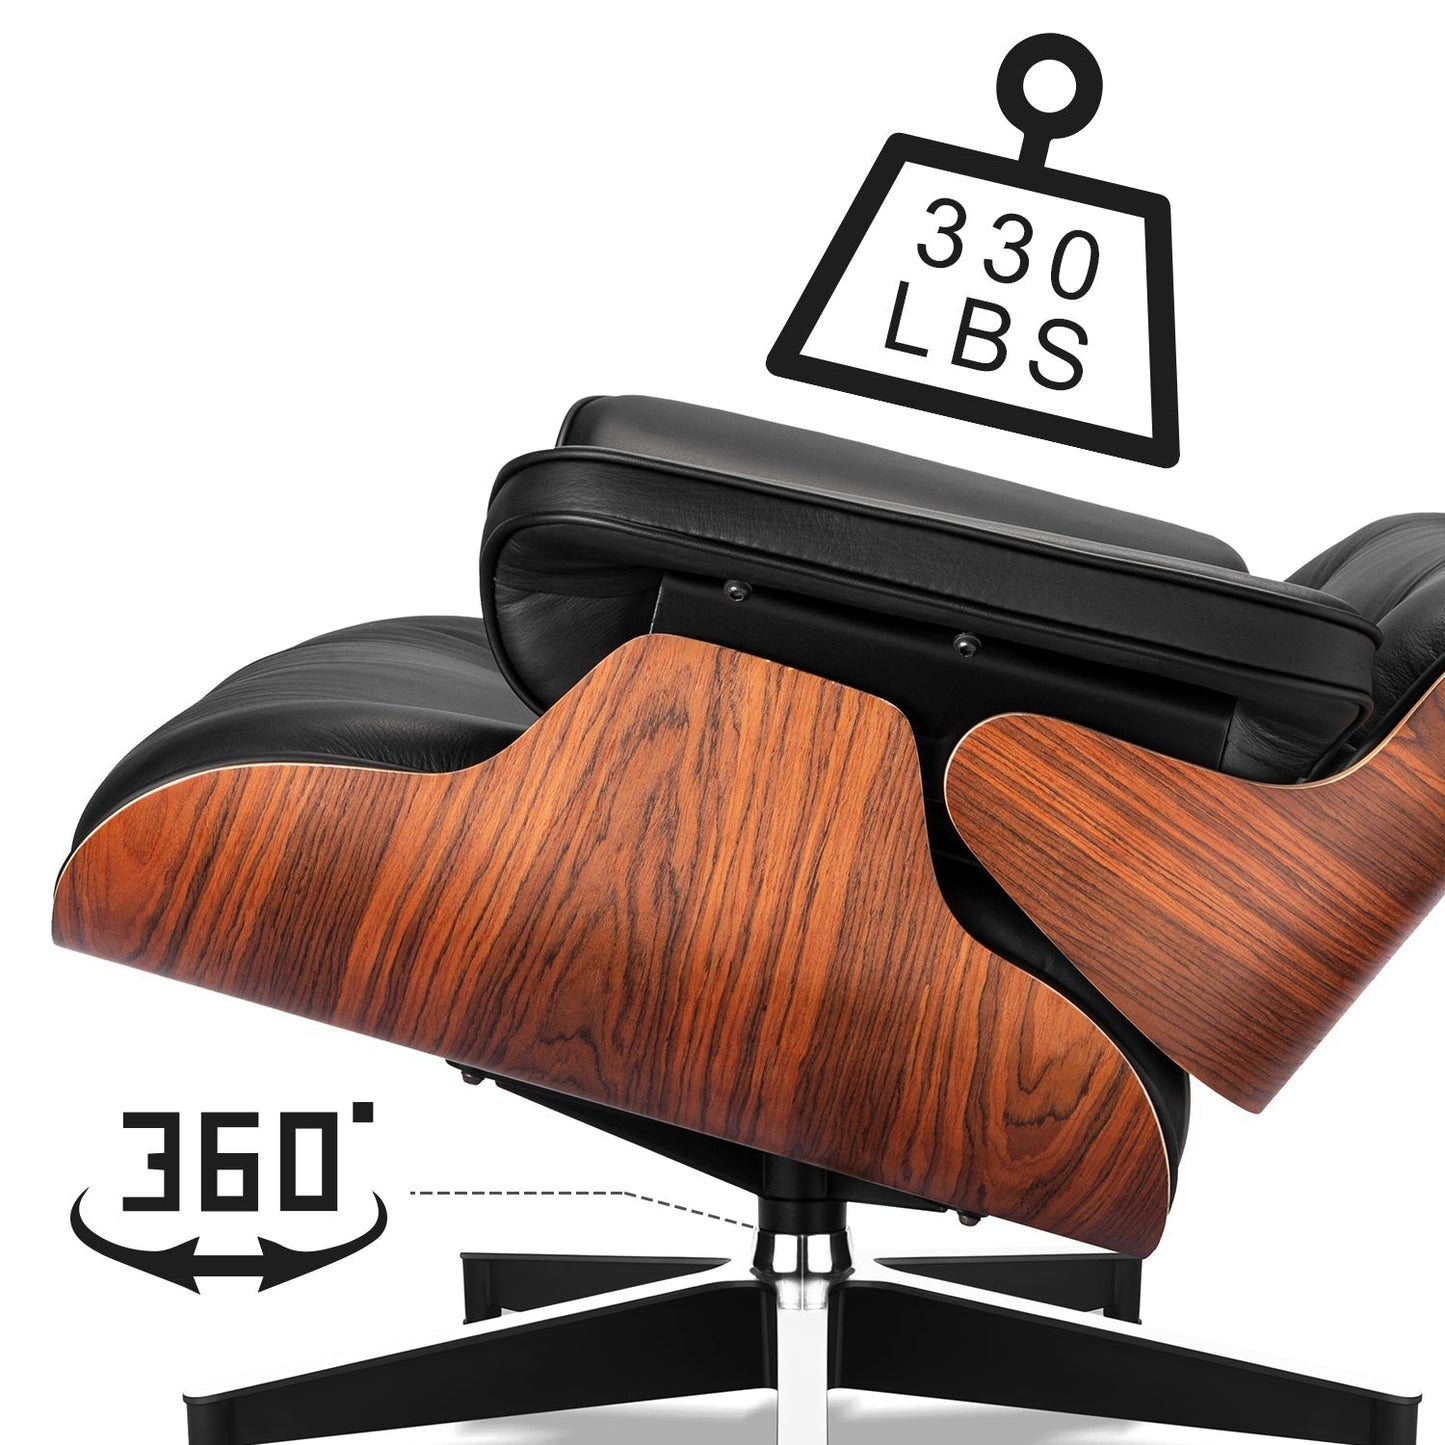 CORX Designs - Eames Mid-Century American Lounge Chair and Ottoman (Tall Version) - Review